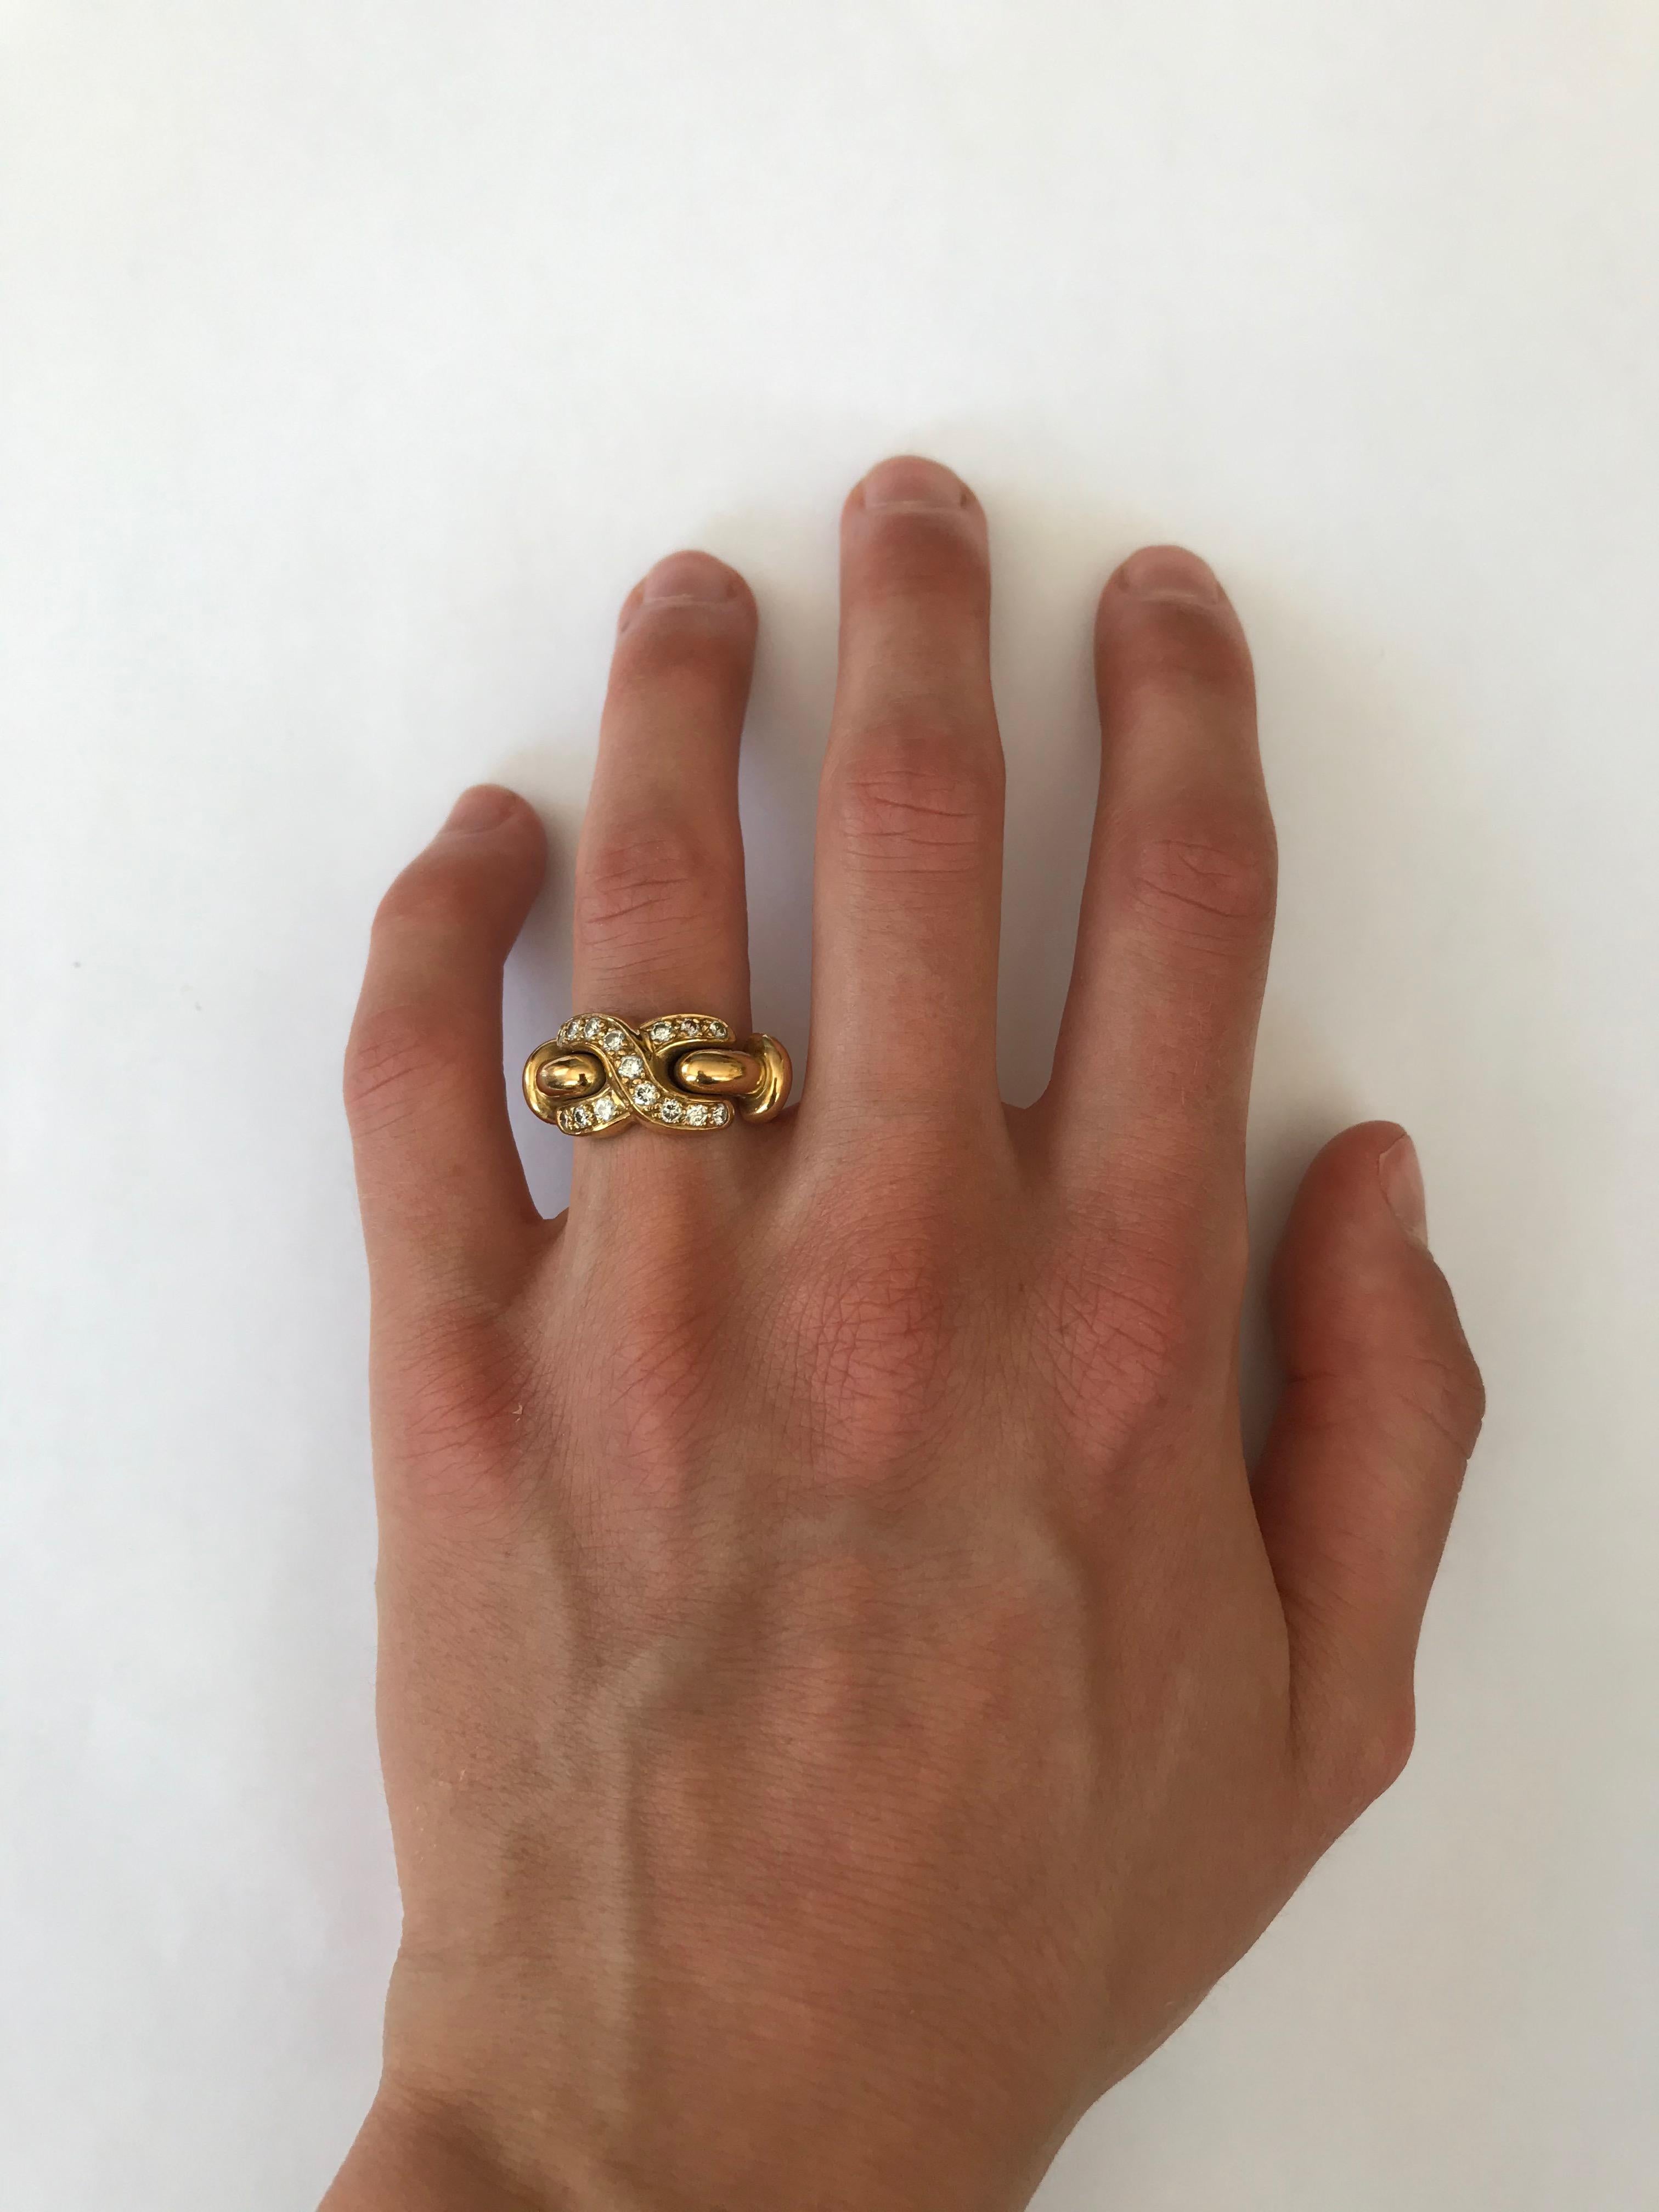 French Designer Louis Feraud Diamond 18k Gold Ring, Paris, signed and numbered 5